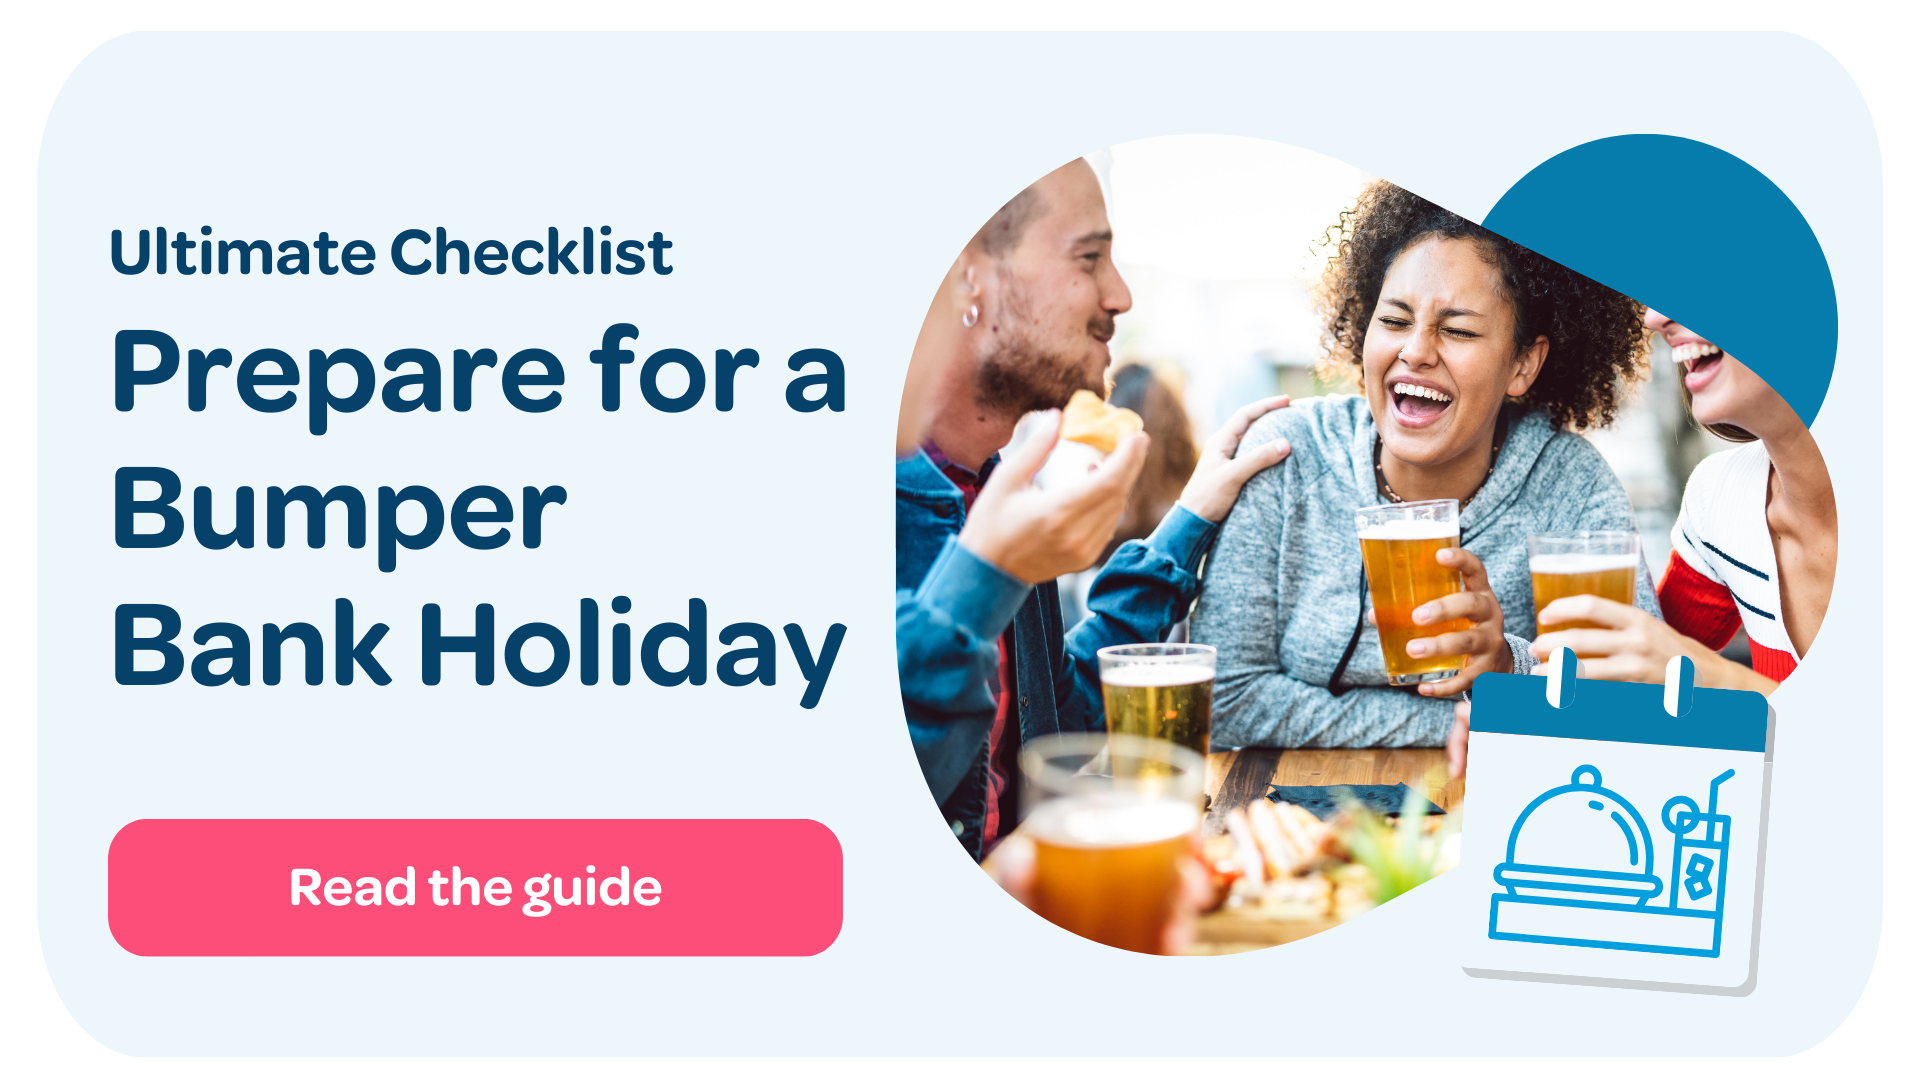 CTA link to Bank Holiday guide